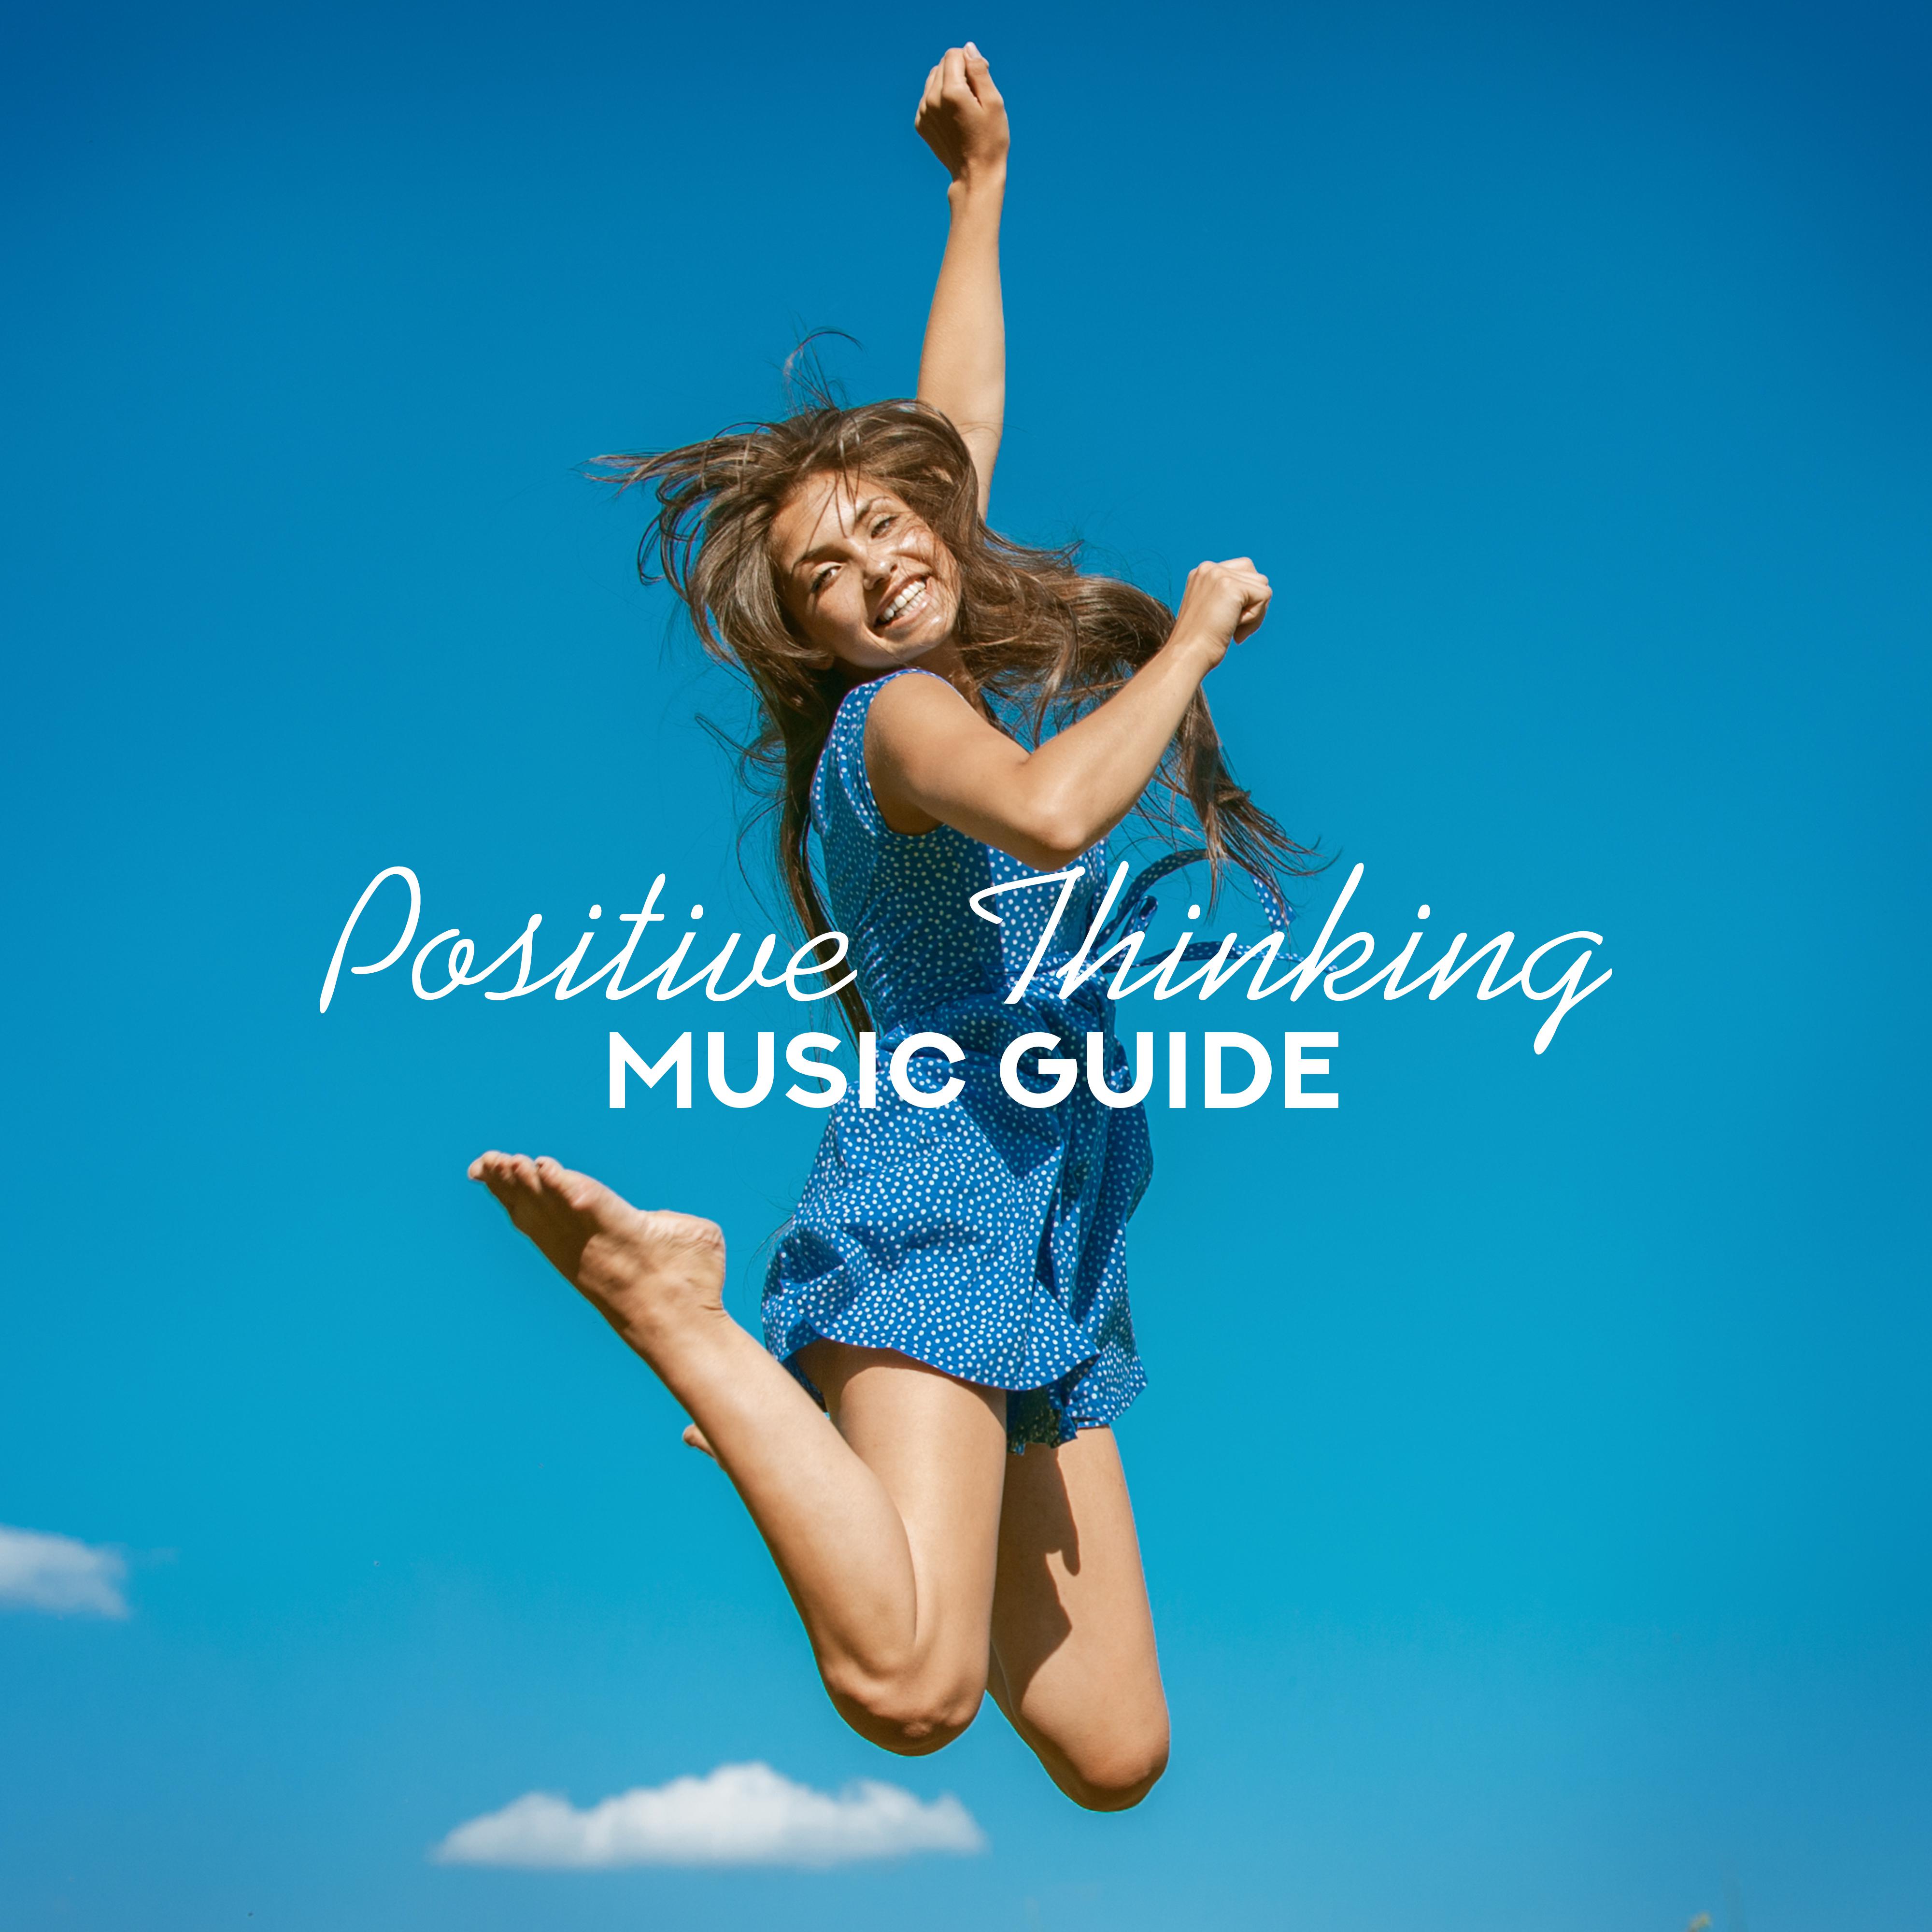 Positive Thinking Music Guide: 2019 New Age Music for Total Relaxation, Inner Harmony, Stress Relief, Good Mood Sounds